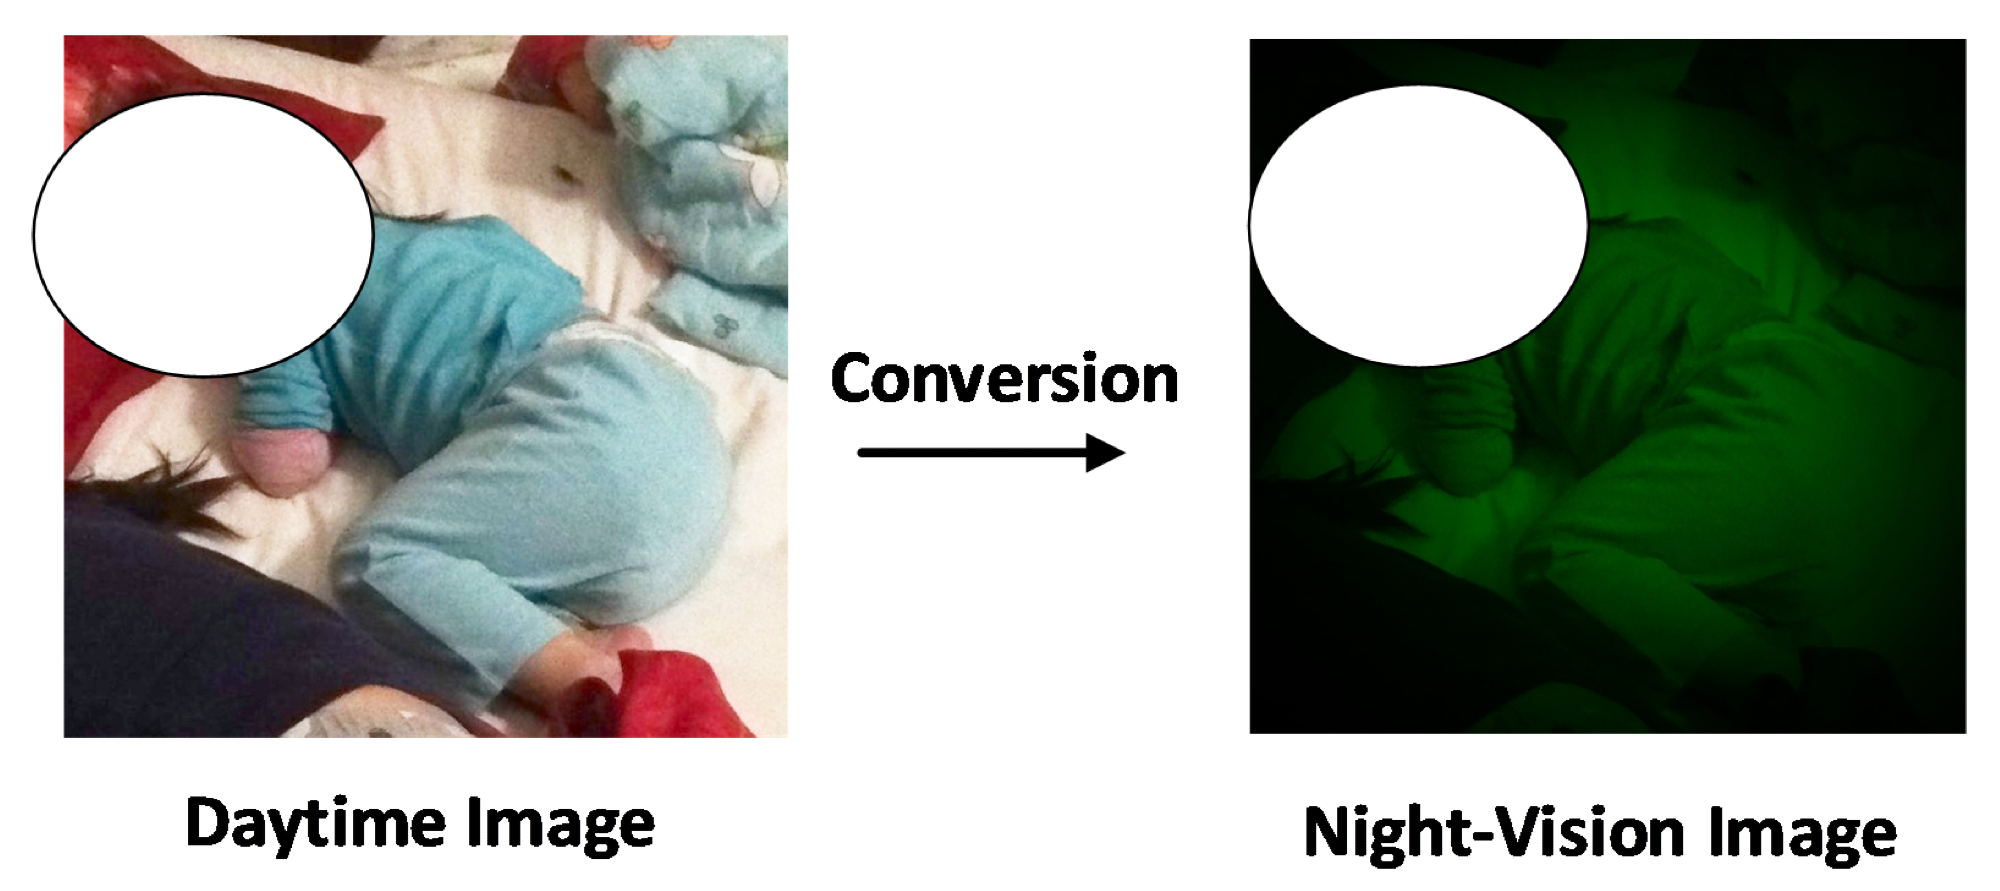 An example of converting a daytime image into a night-vision image for infant sleep posture detection. The child’s face is hidden for privacy.